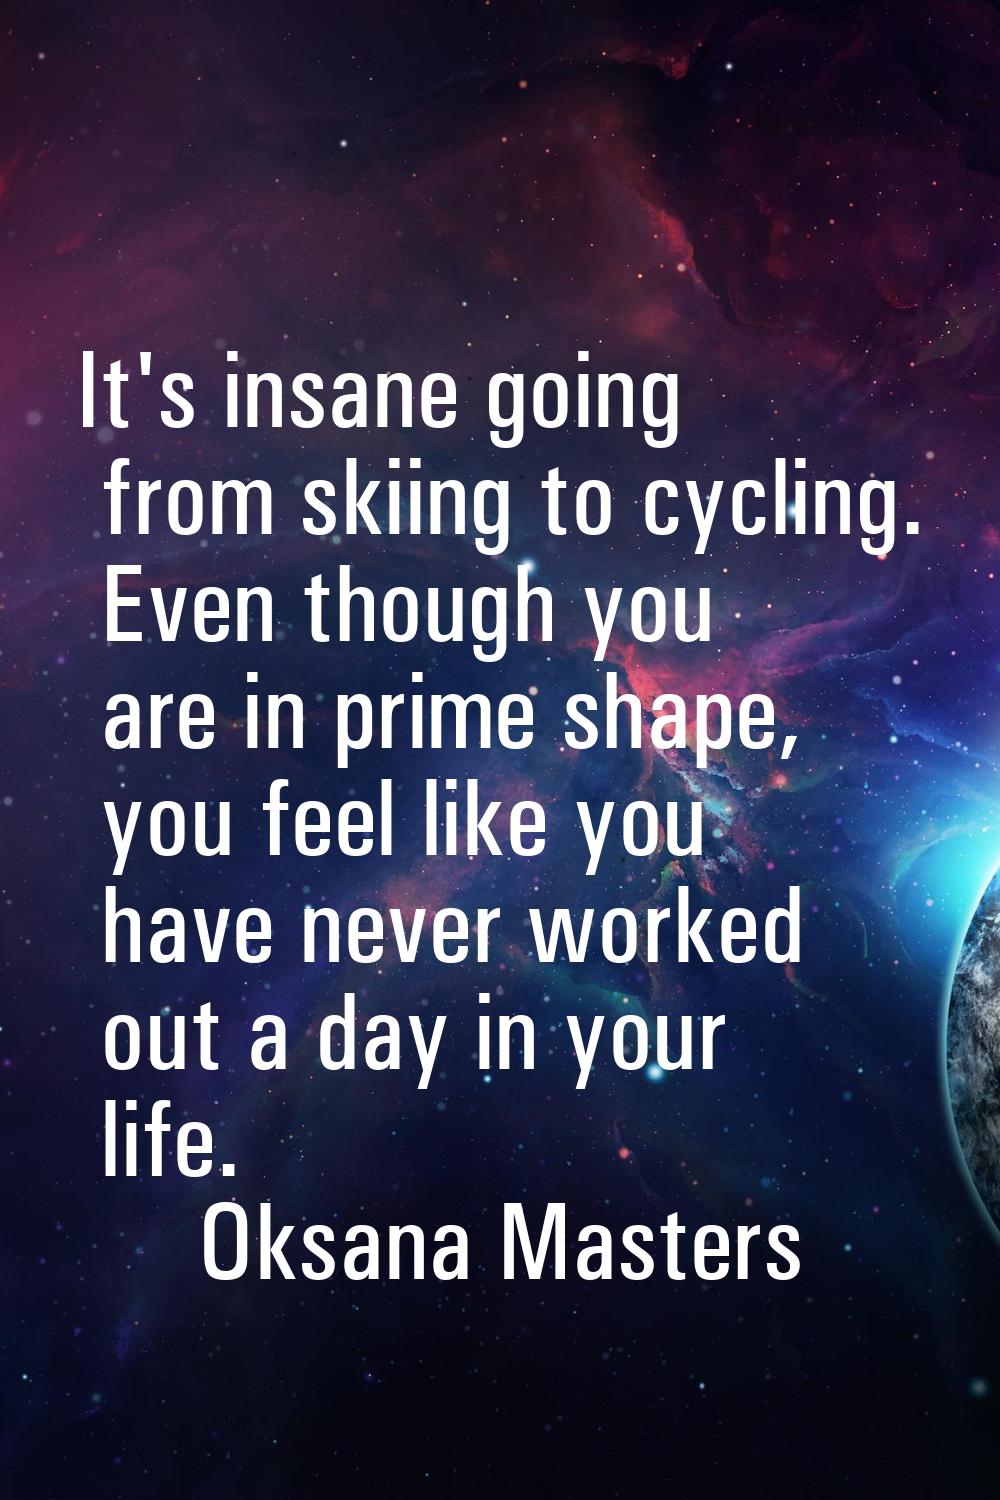 It's insane going from skiing to cycling. Even though you are in prime shape, you feel like you hav